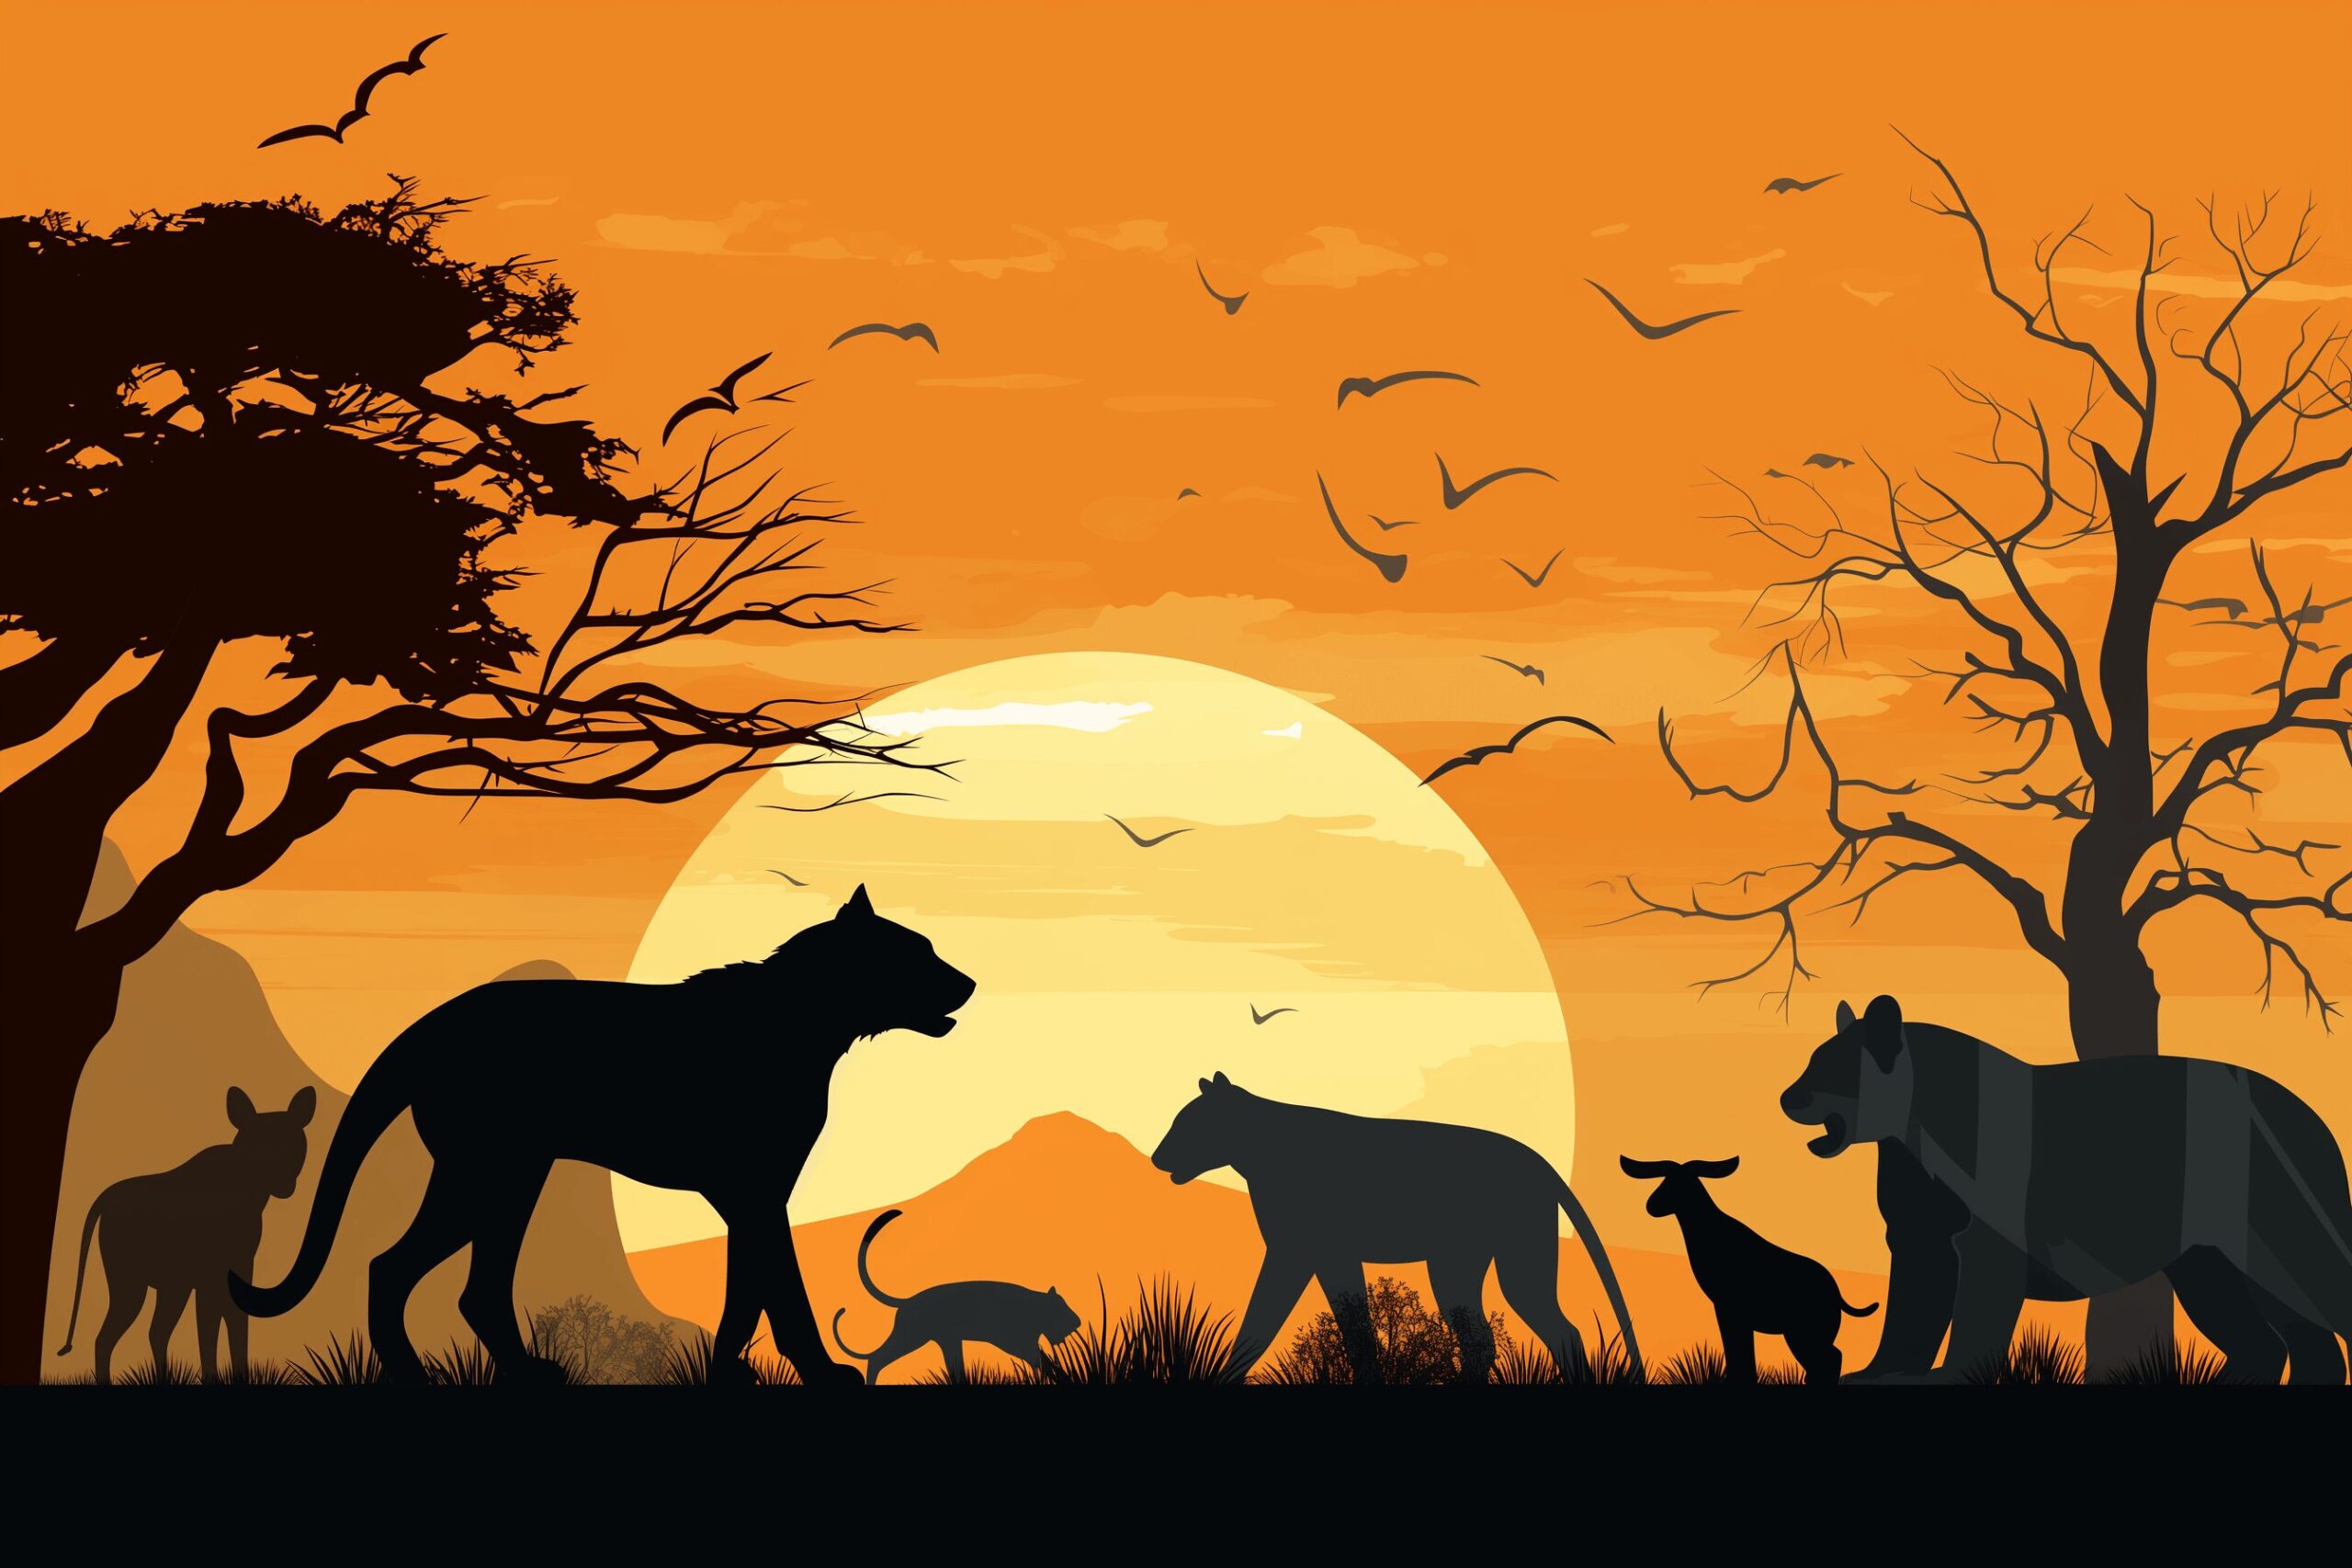 Silhouettes of various dangerous animals